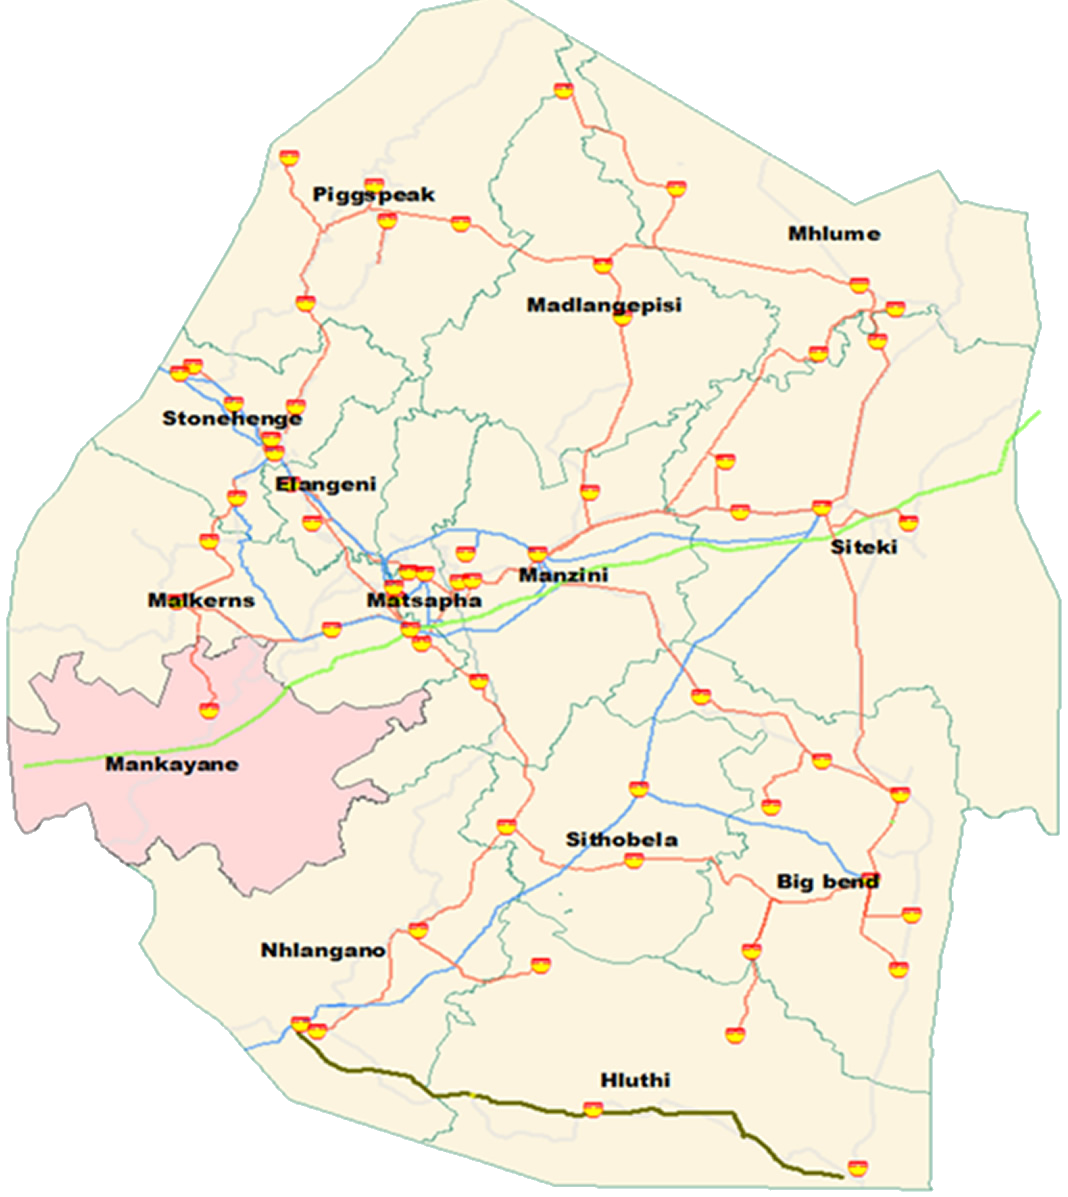 EEC Depots, Revenues And Regional Offices